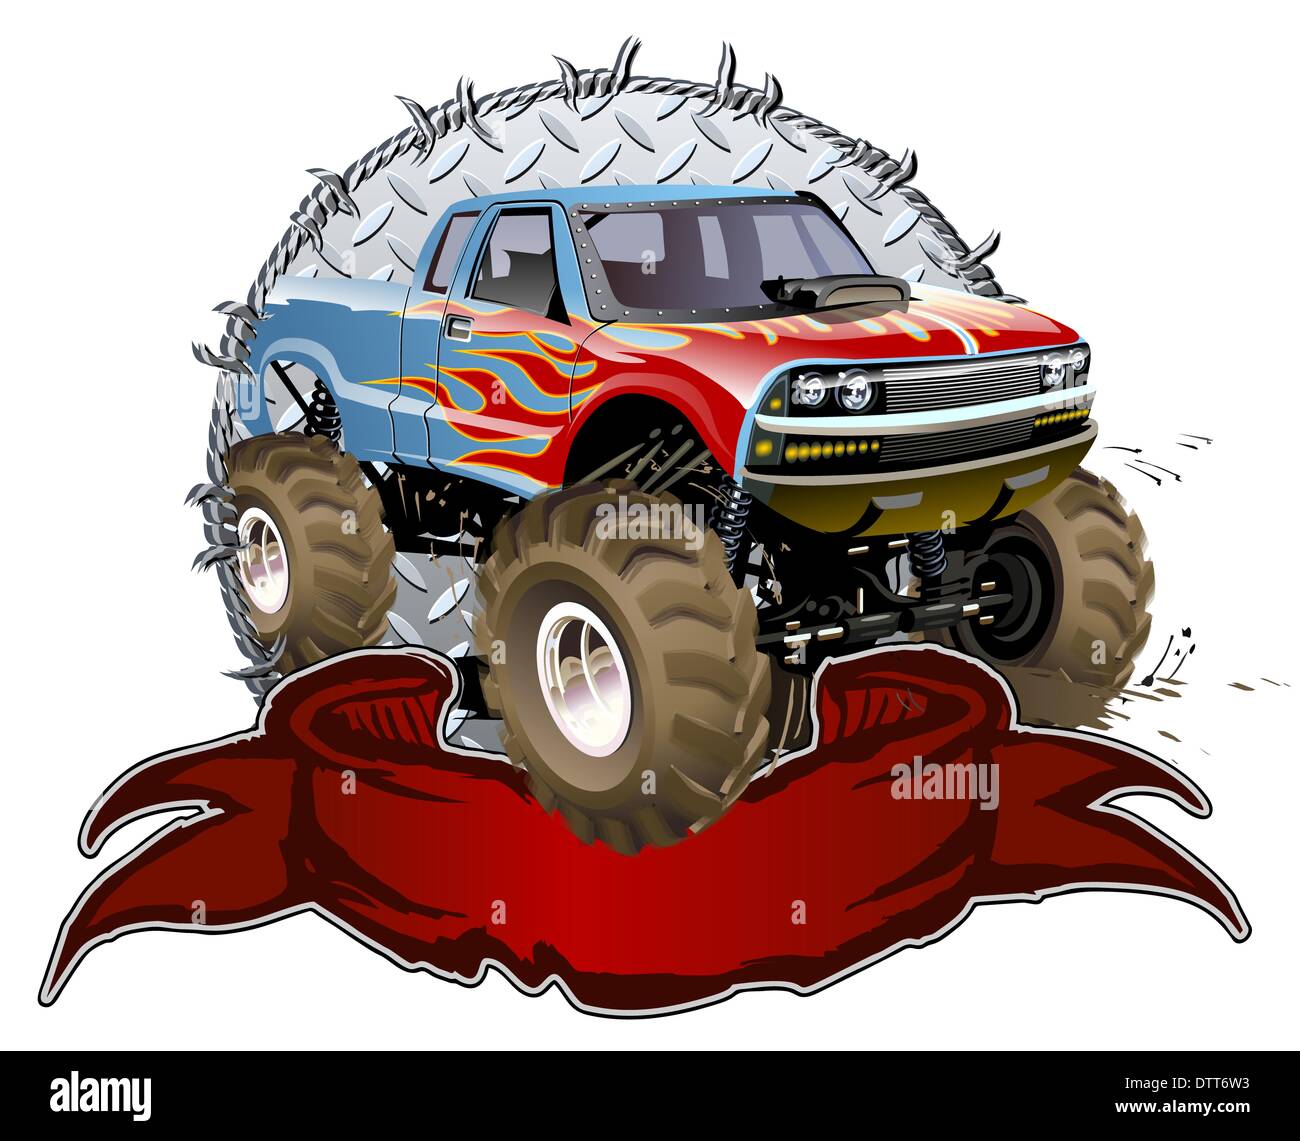 Monster truck ride Cut Out Stock Images & Pictures - Alamy